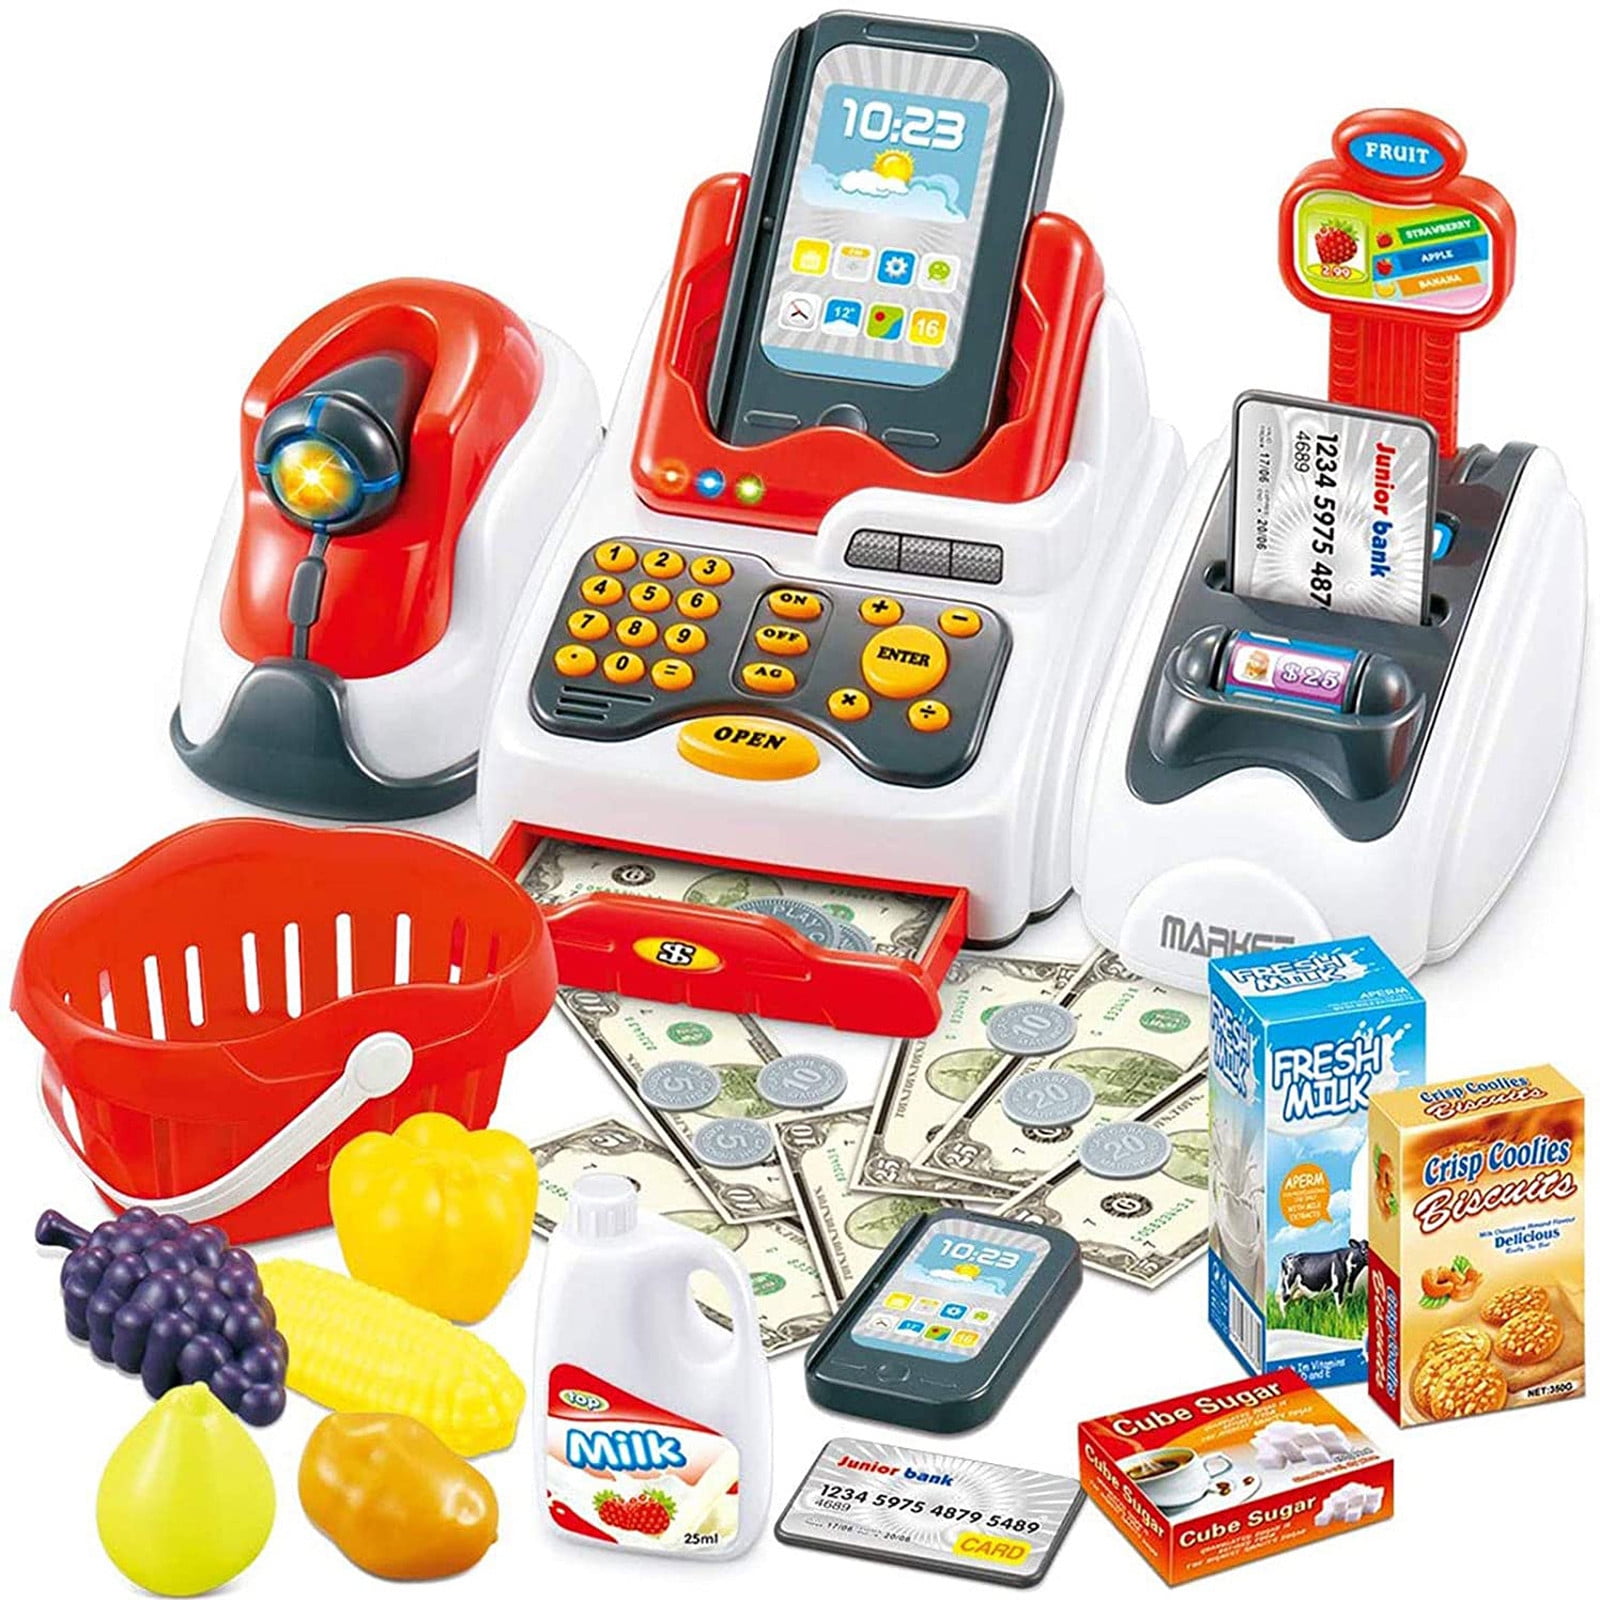 Details about   Kids 24-Hour Convenience Store w/ Cash Register Pretend Toy Birthday Gift 